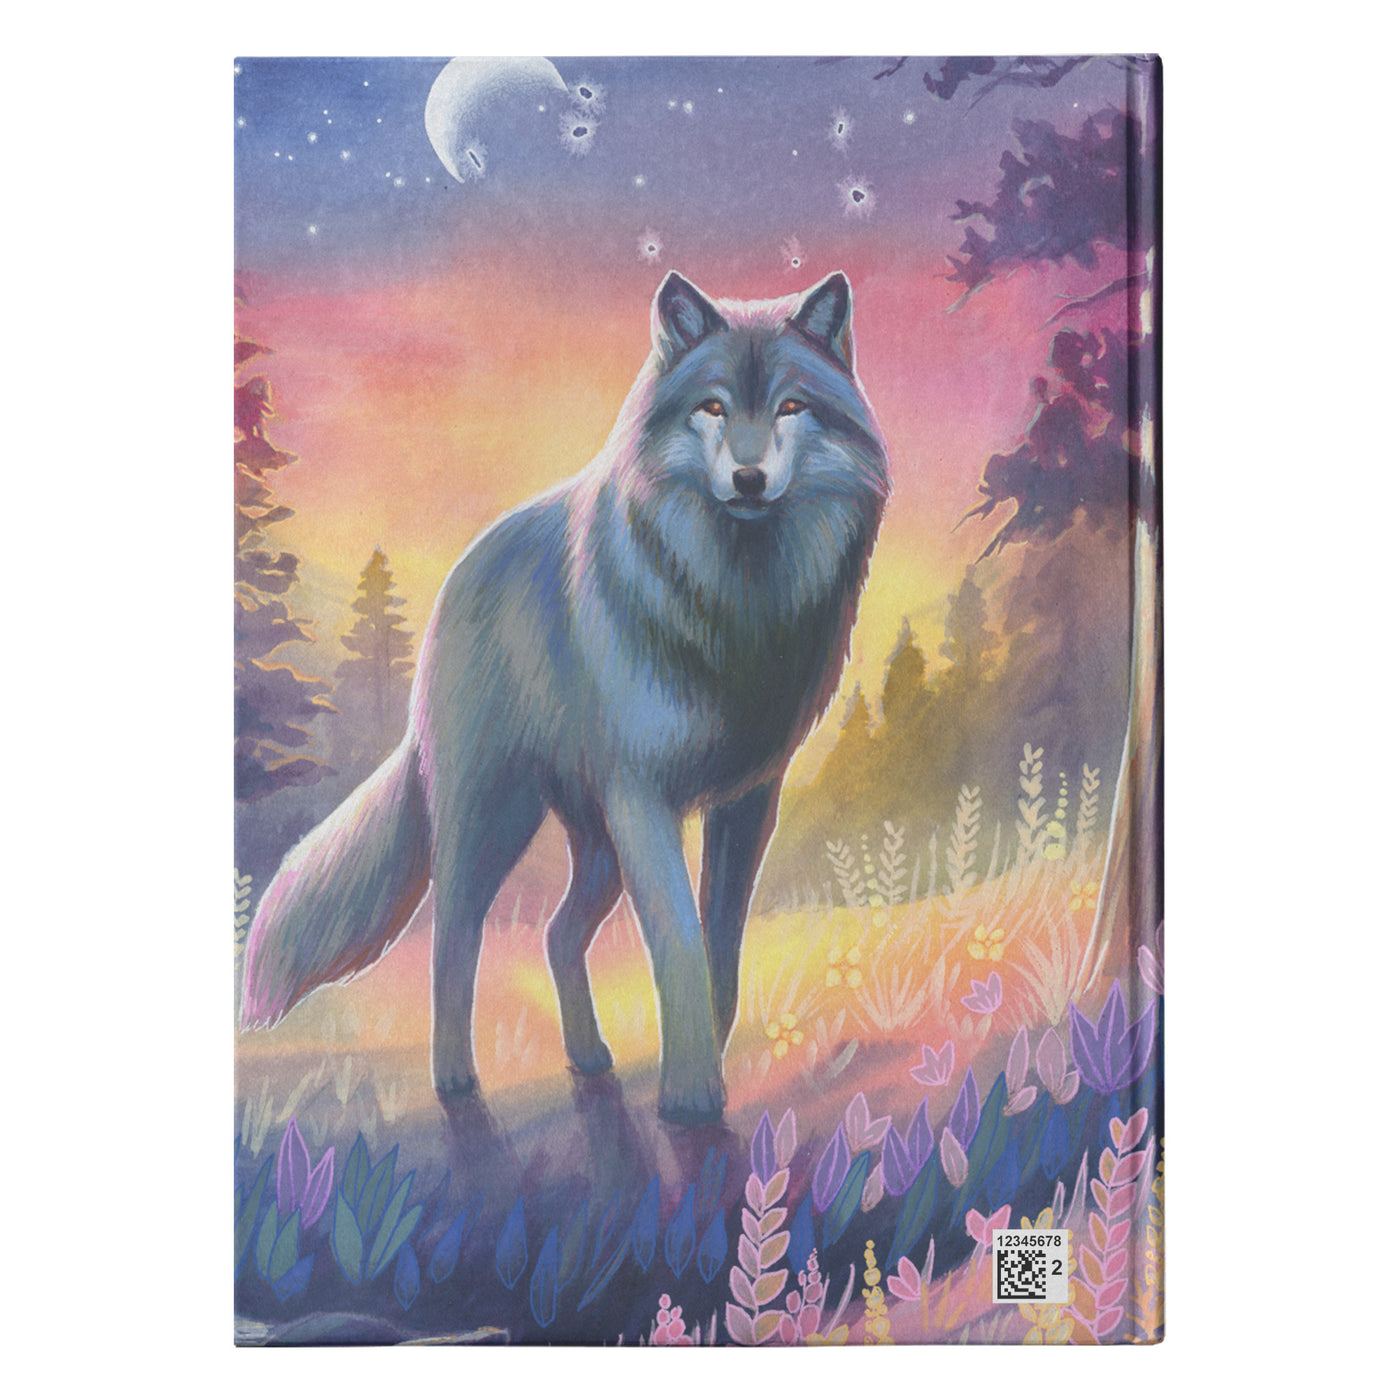 Wolf Journal of a wolf standing in a colorful forest at sunset with a crescent moon and stars overhead.